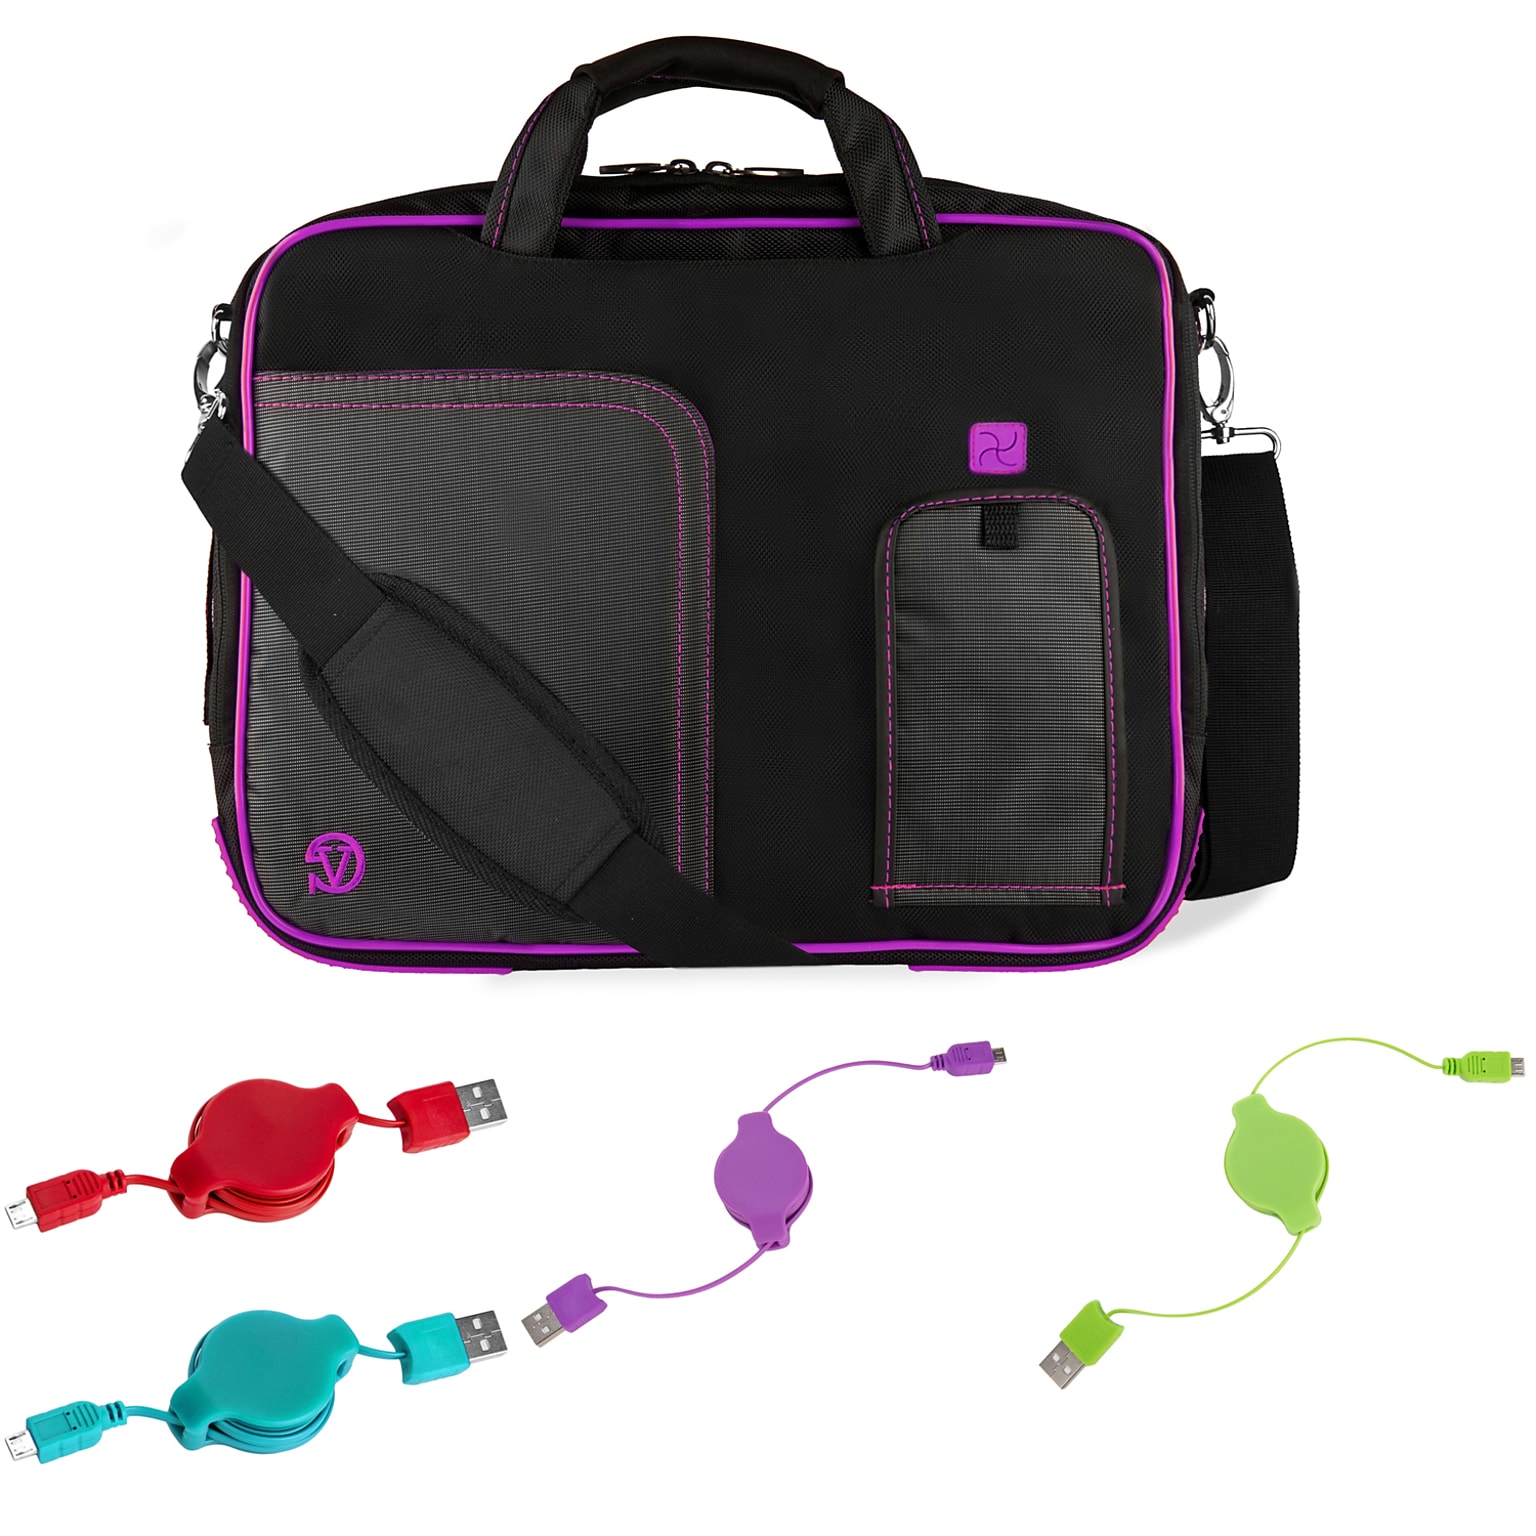 Vangoddy Office Business Travel Laptop Case up to 14 inch laptop + 4x MicroUSB Charging Cables, Black Purple